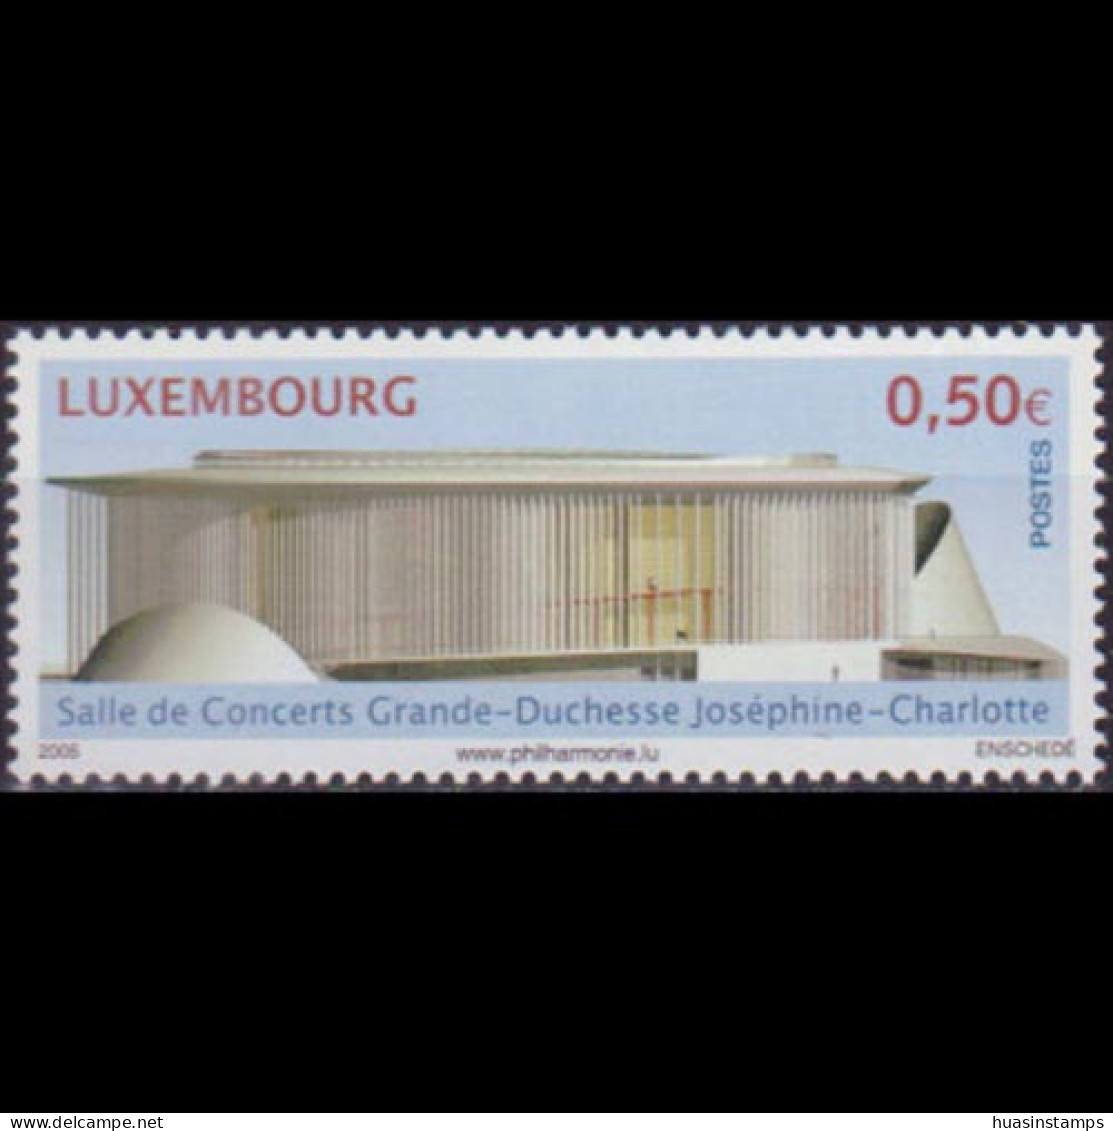 LUXEMBOURG 2005 - Scott# 1161 Concert Hall Set Of 1 MNH - Unused Stamps